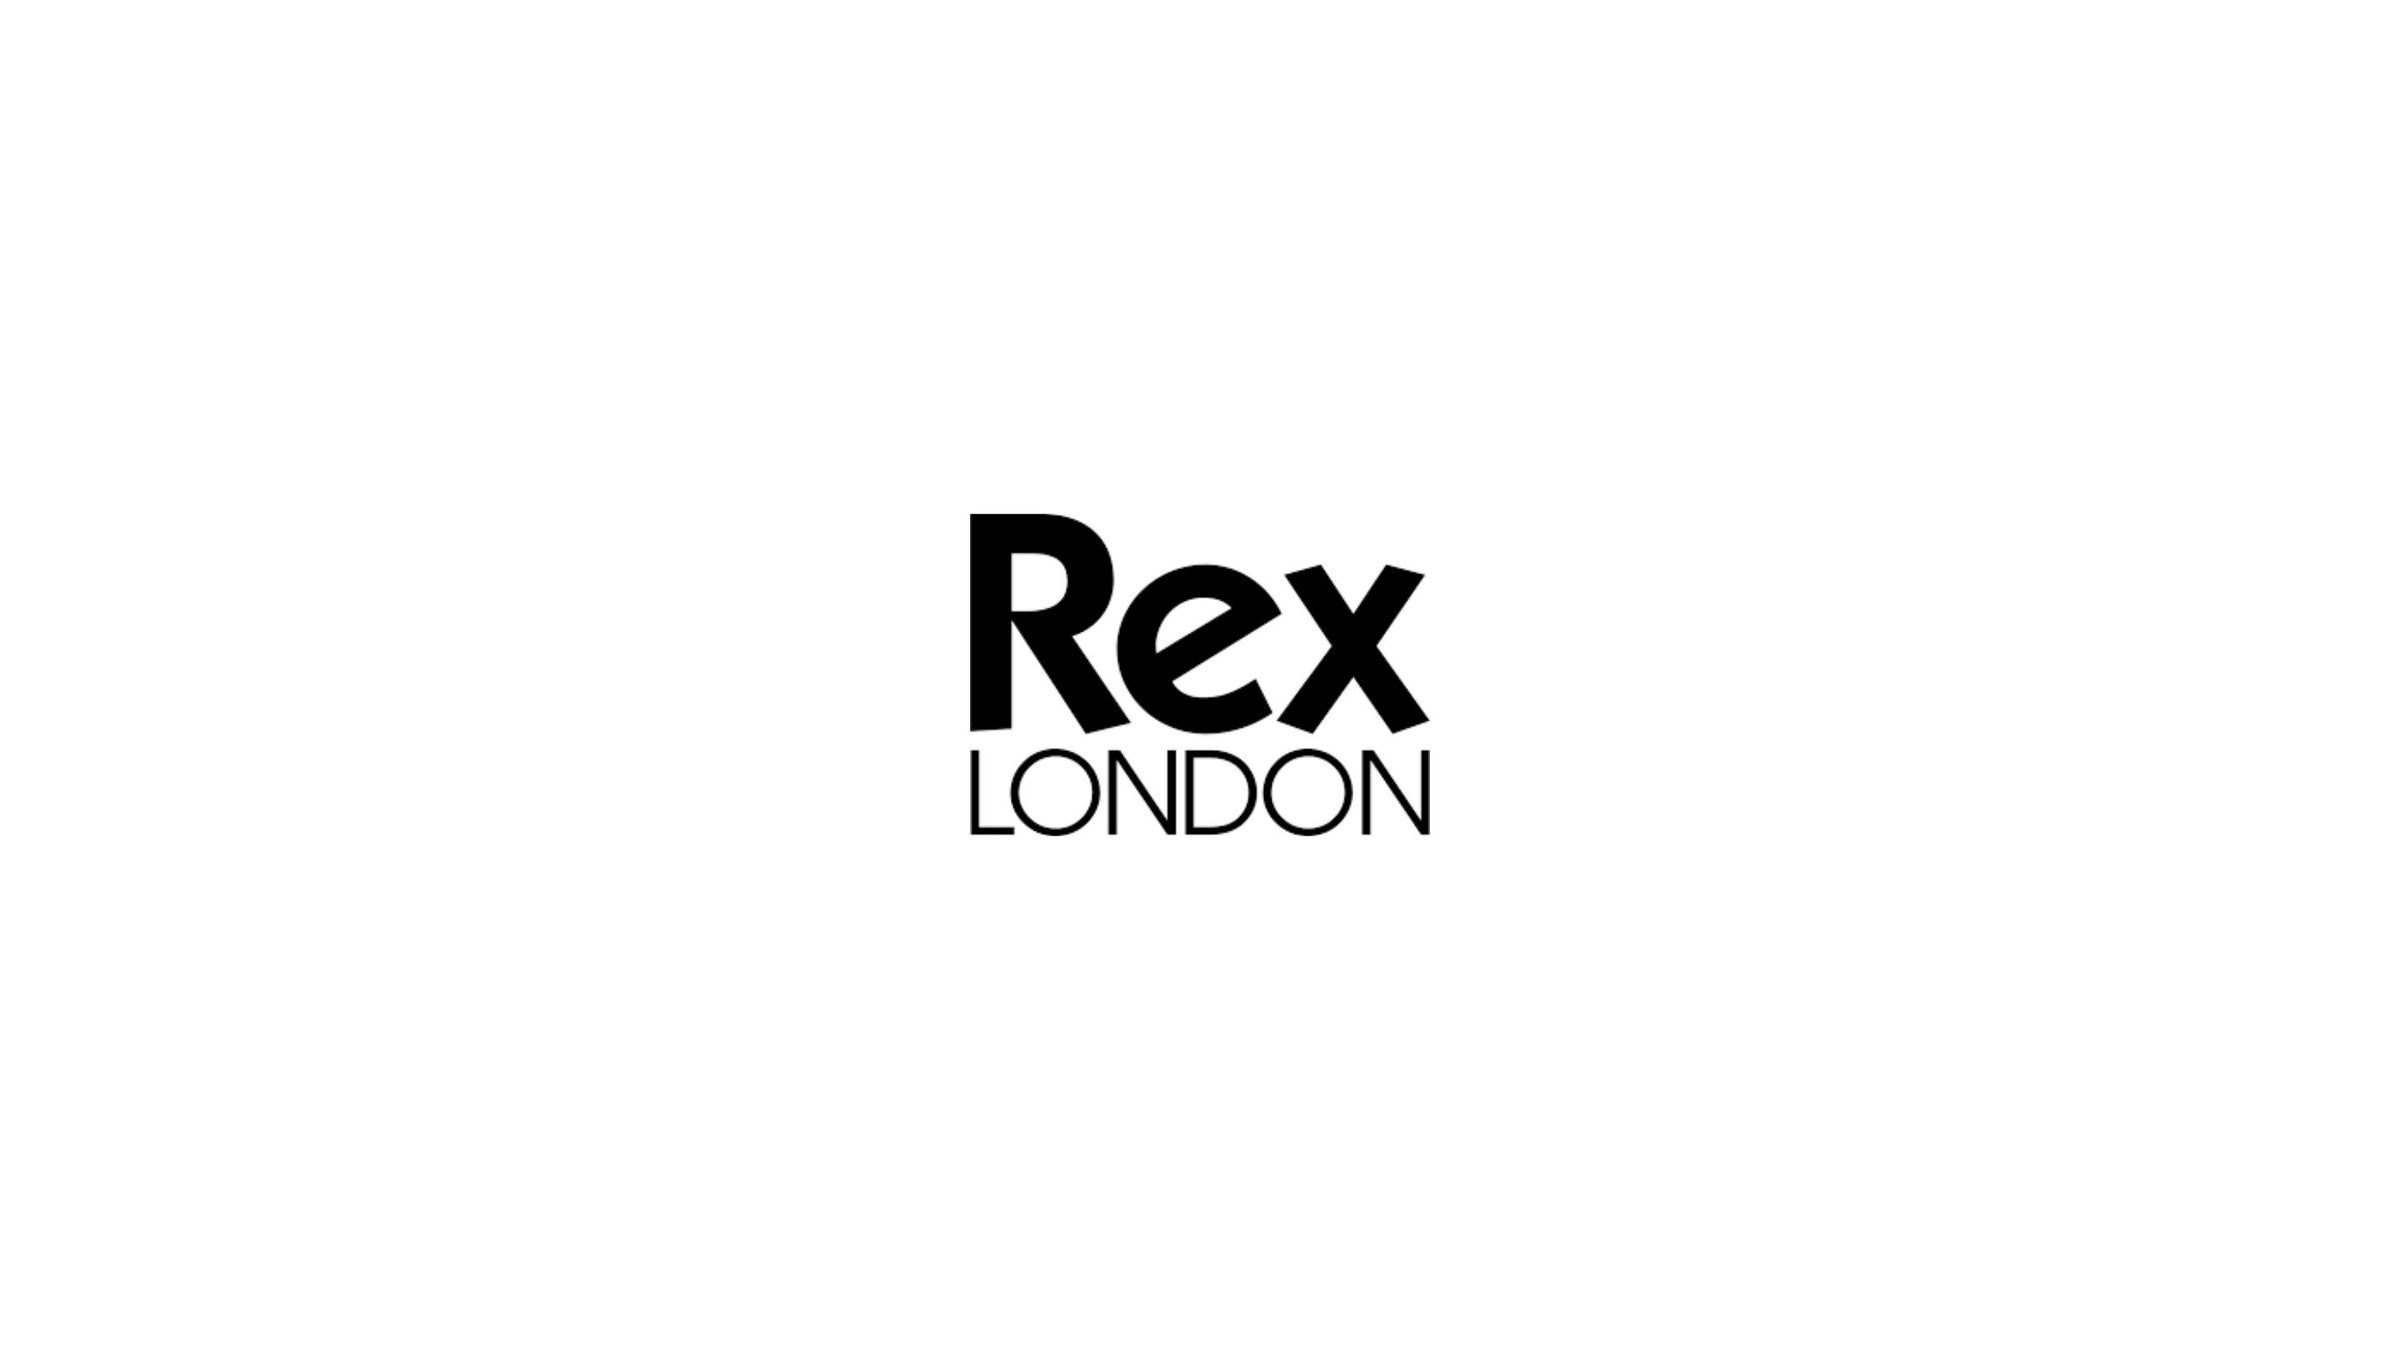 Rex in bold balck letters and London in a lighter text underneath